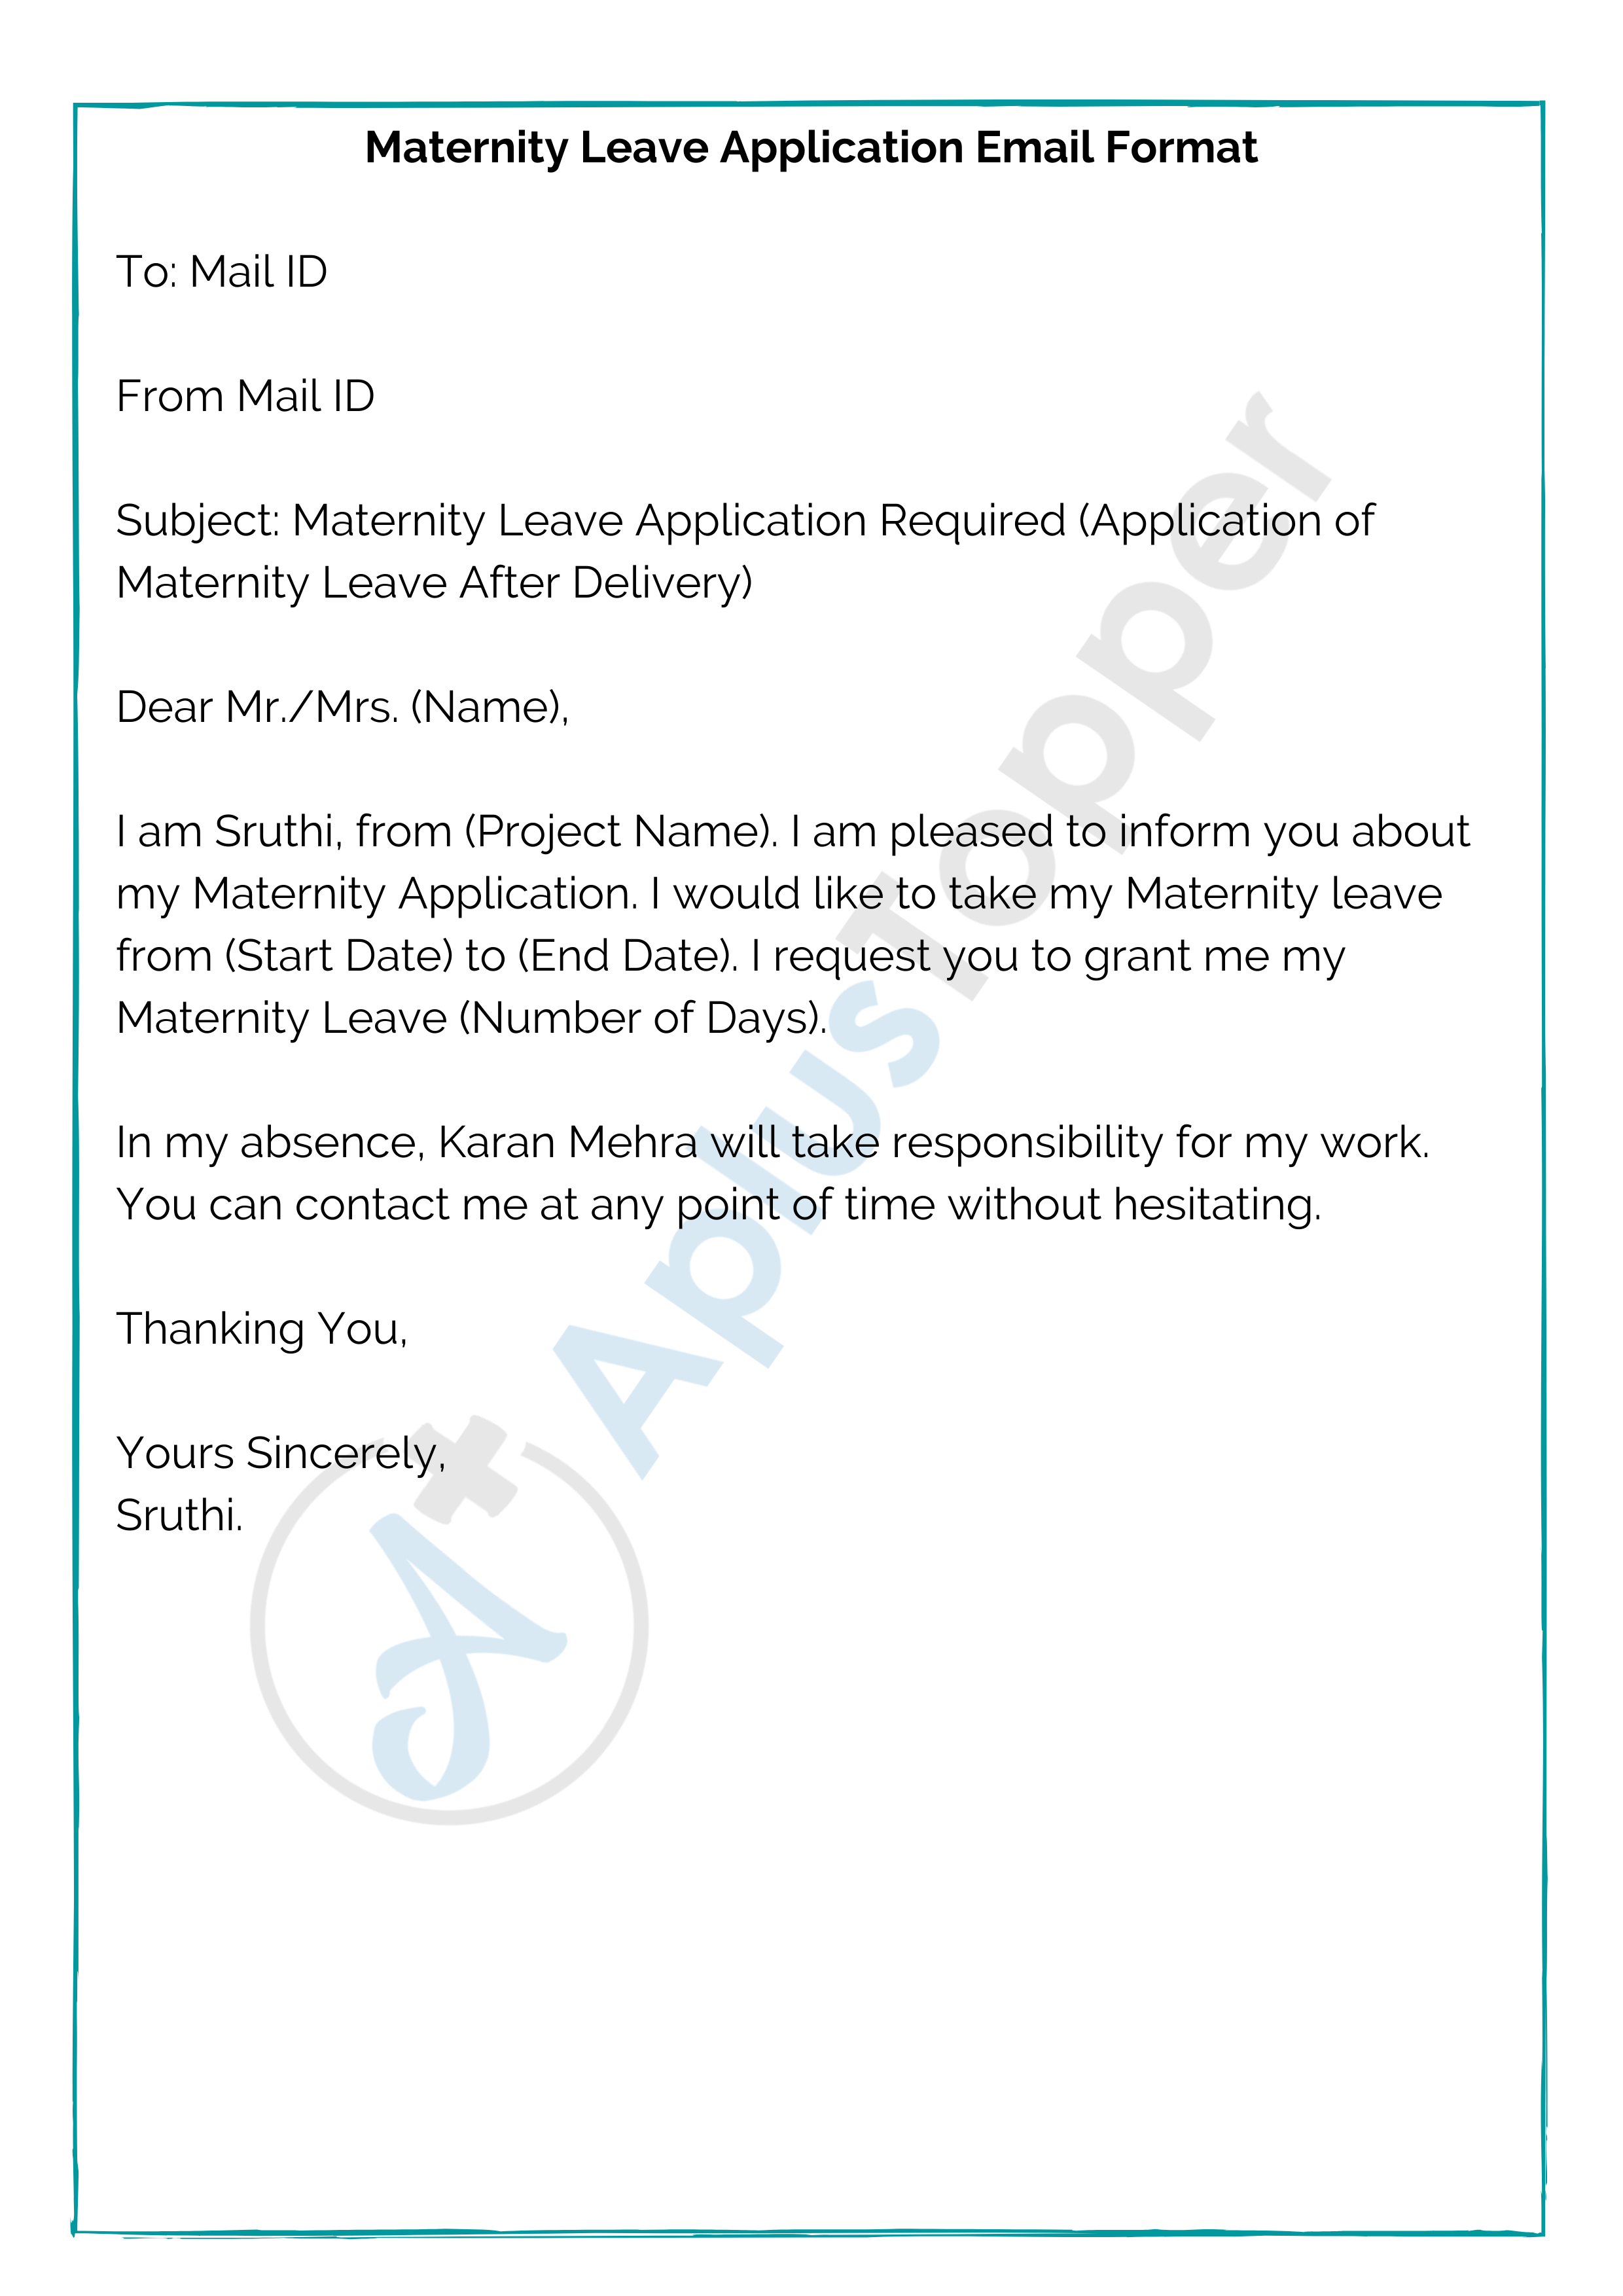 Maternity Leave Application Email Format